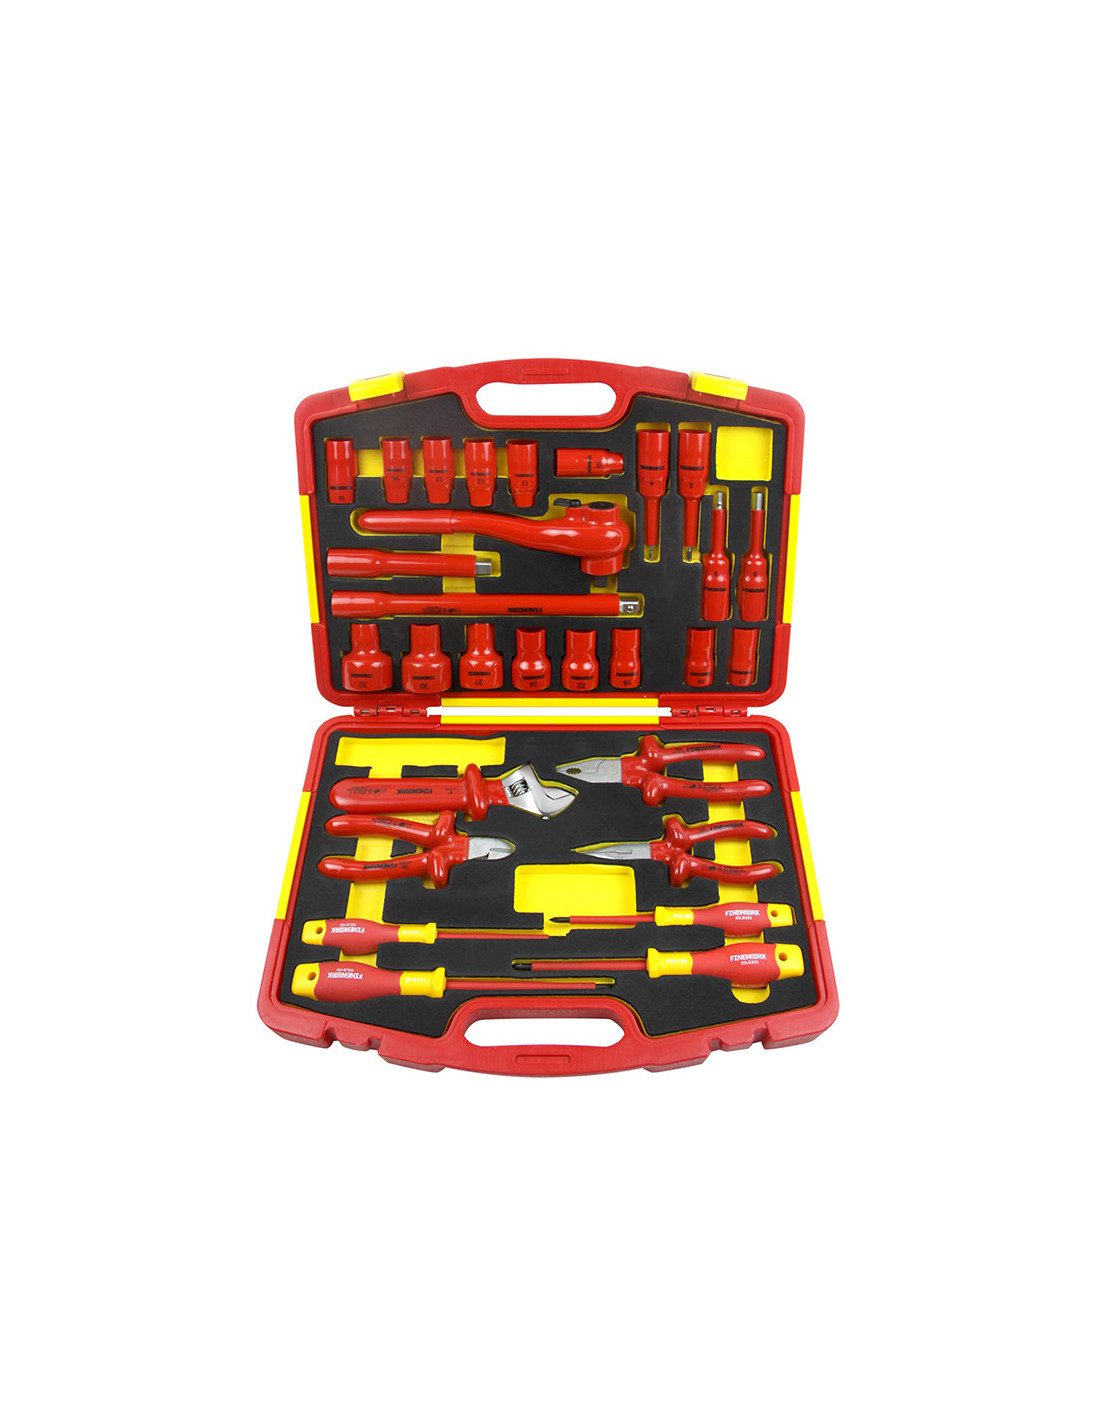 1000v insulated 29 pc tool kit